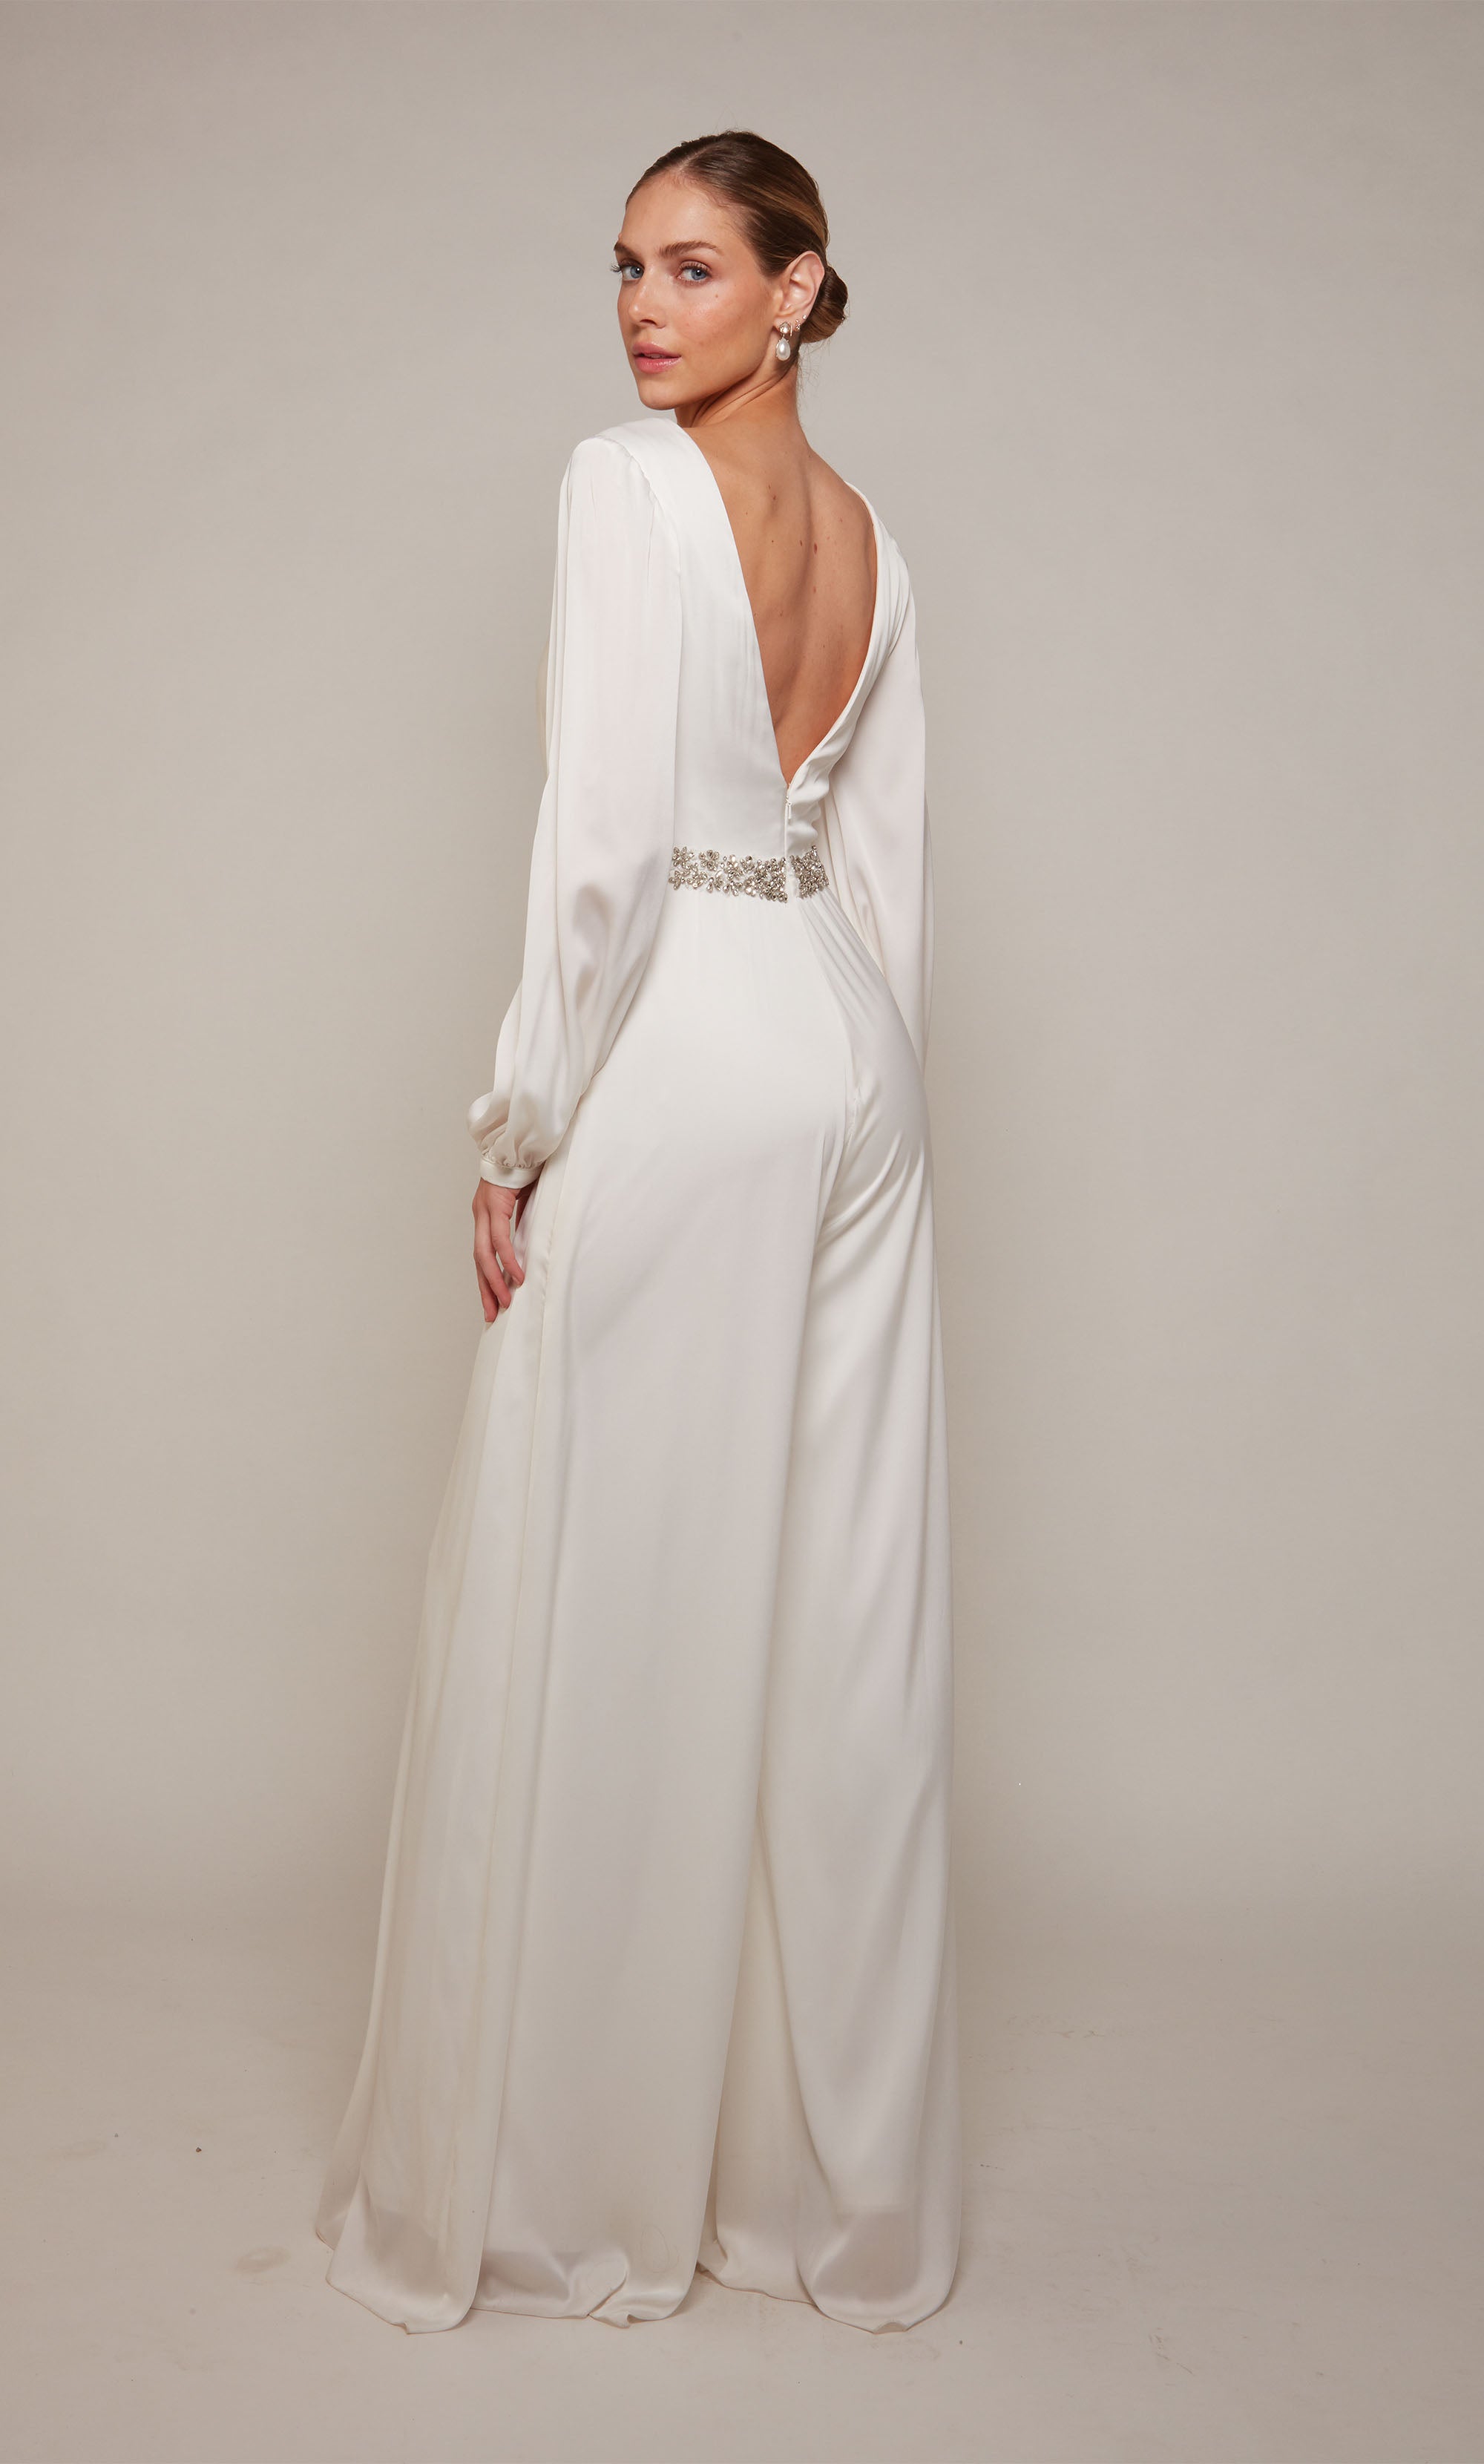 Wedding Jumpsuits: 31 Ideas For Every Bride + FAQs